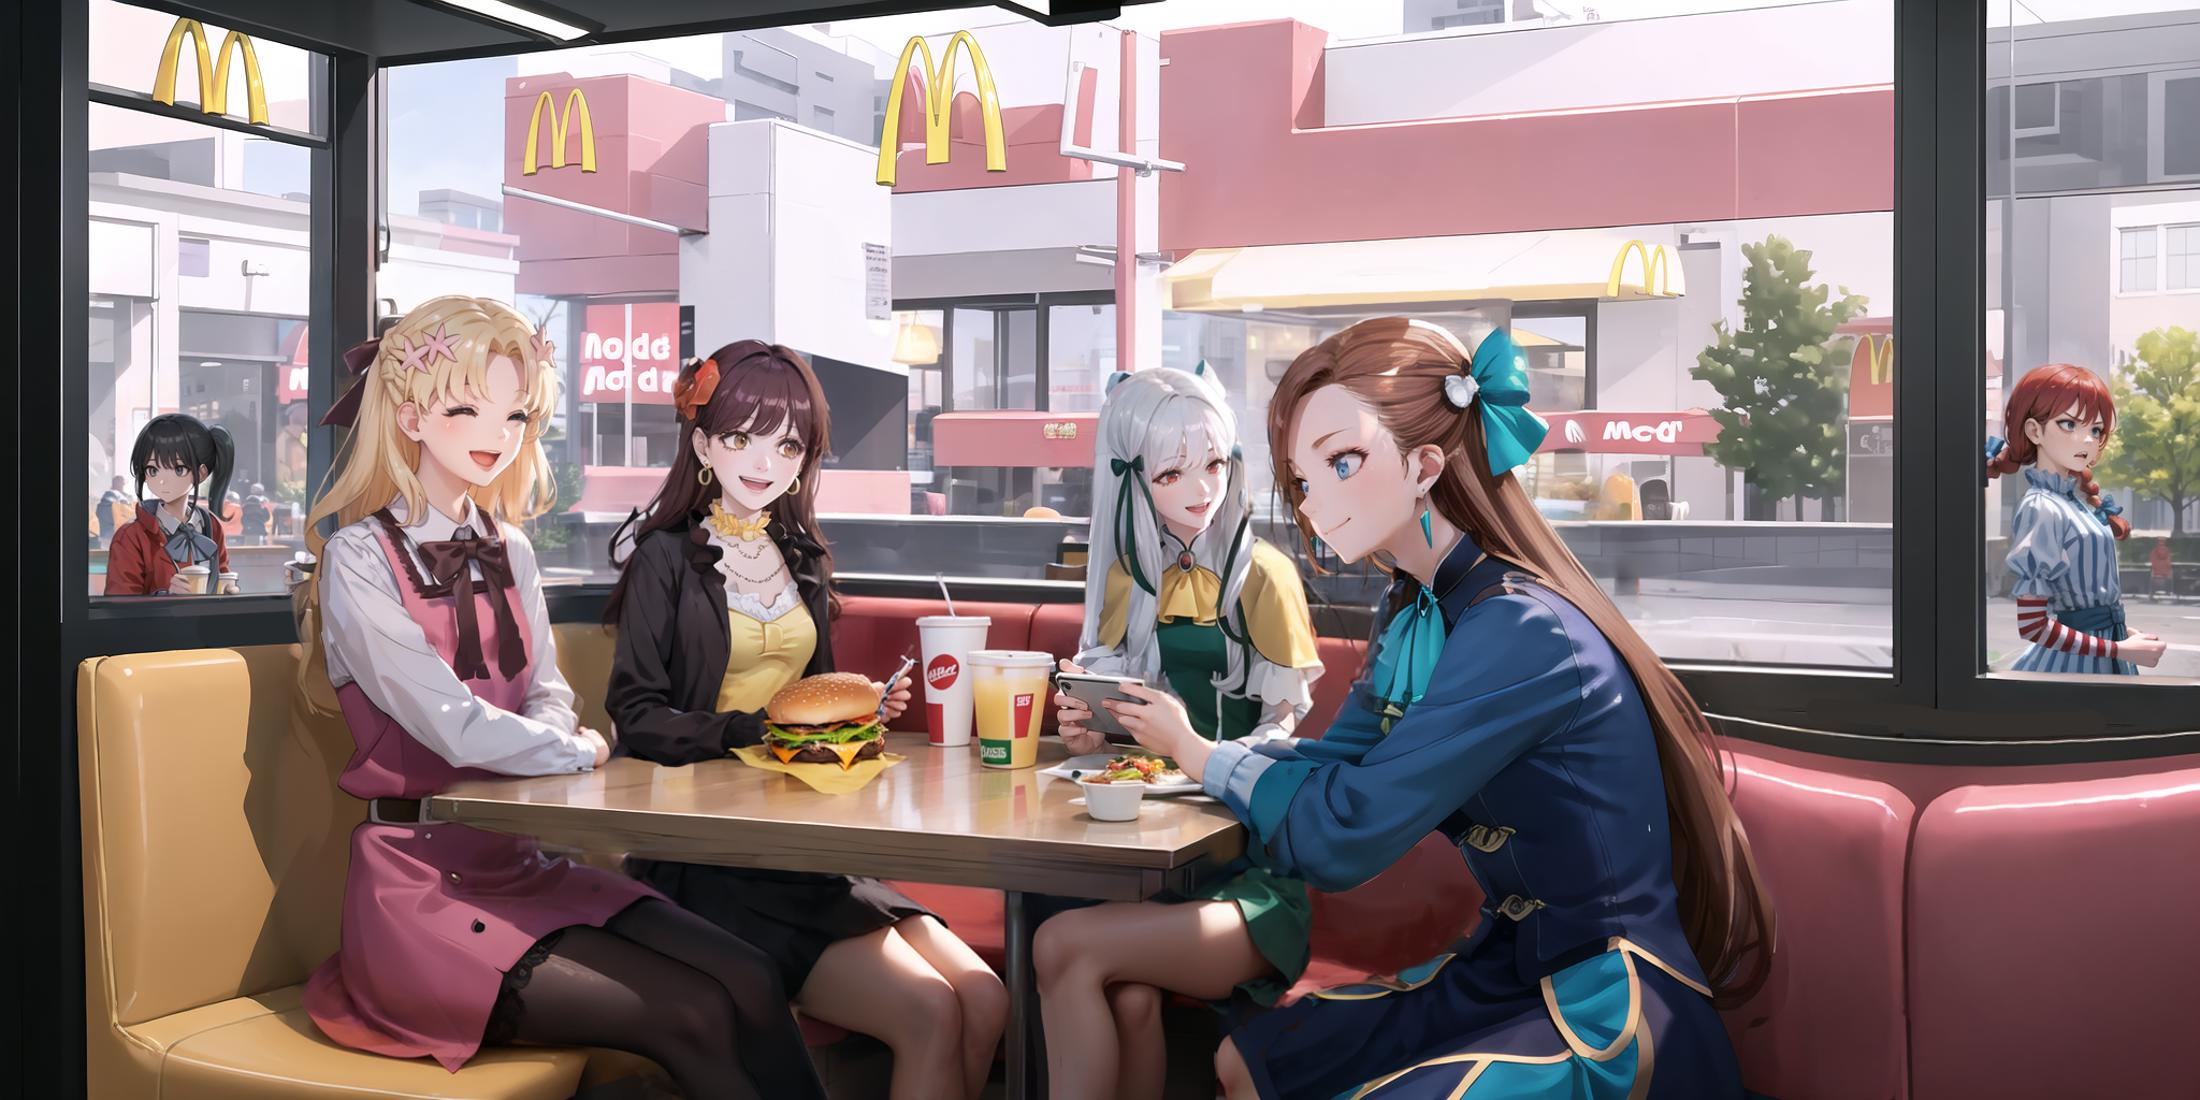 A group of four animated females sitting at a dining table in a fast food restaurant, enjoying burgers and drinks.